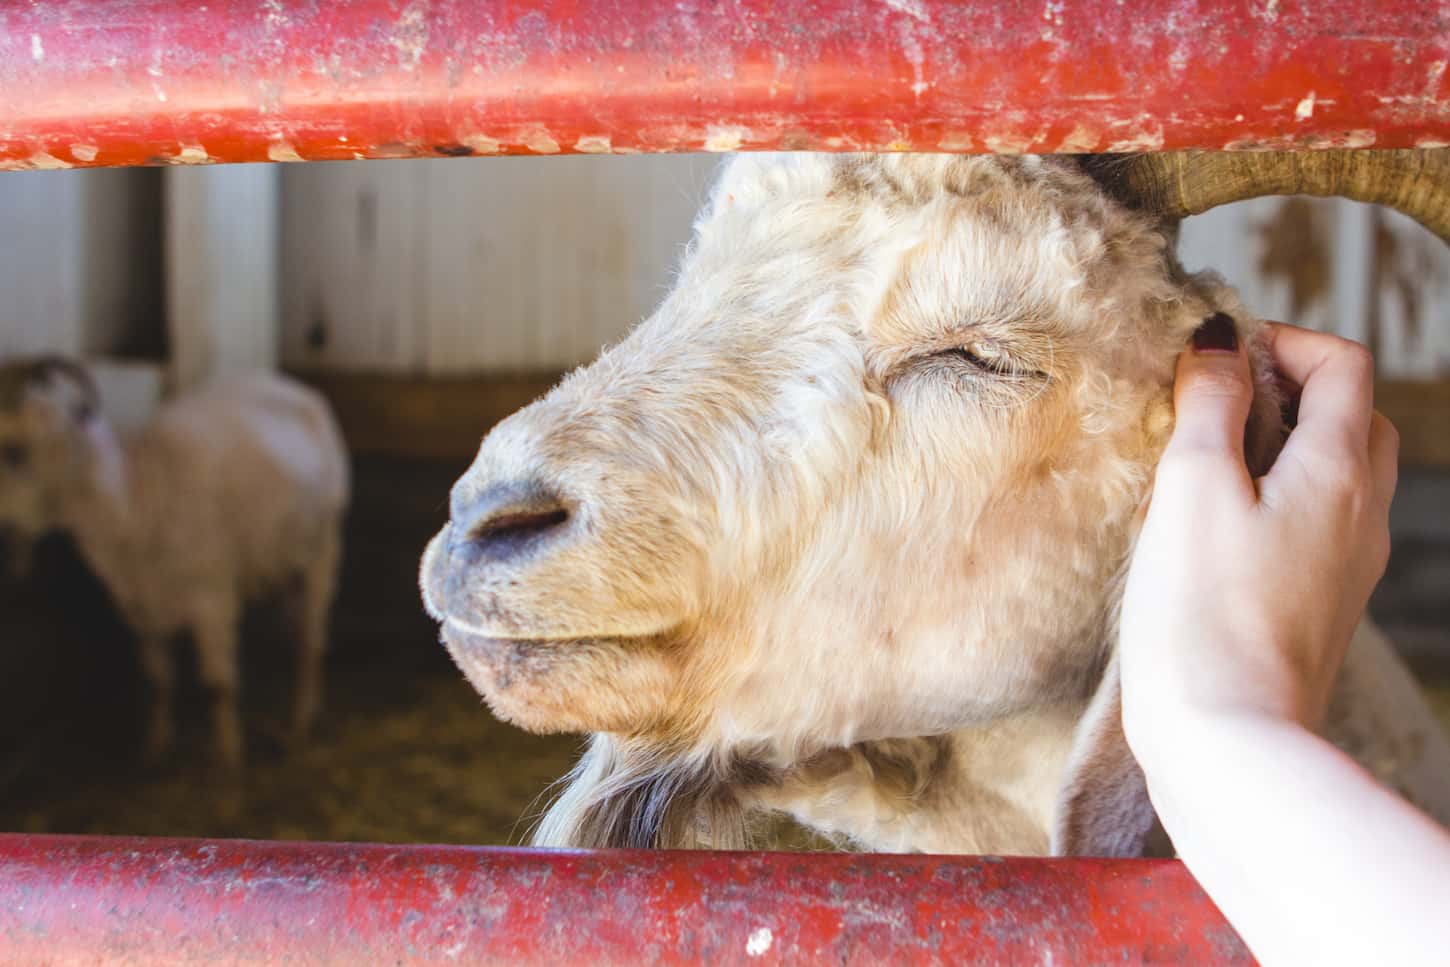 An image of a woman's hand petting a goat.